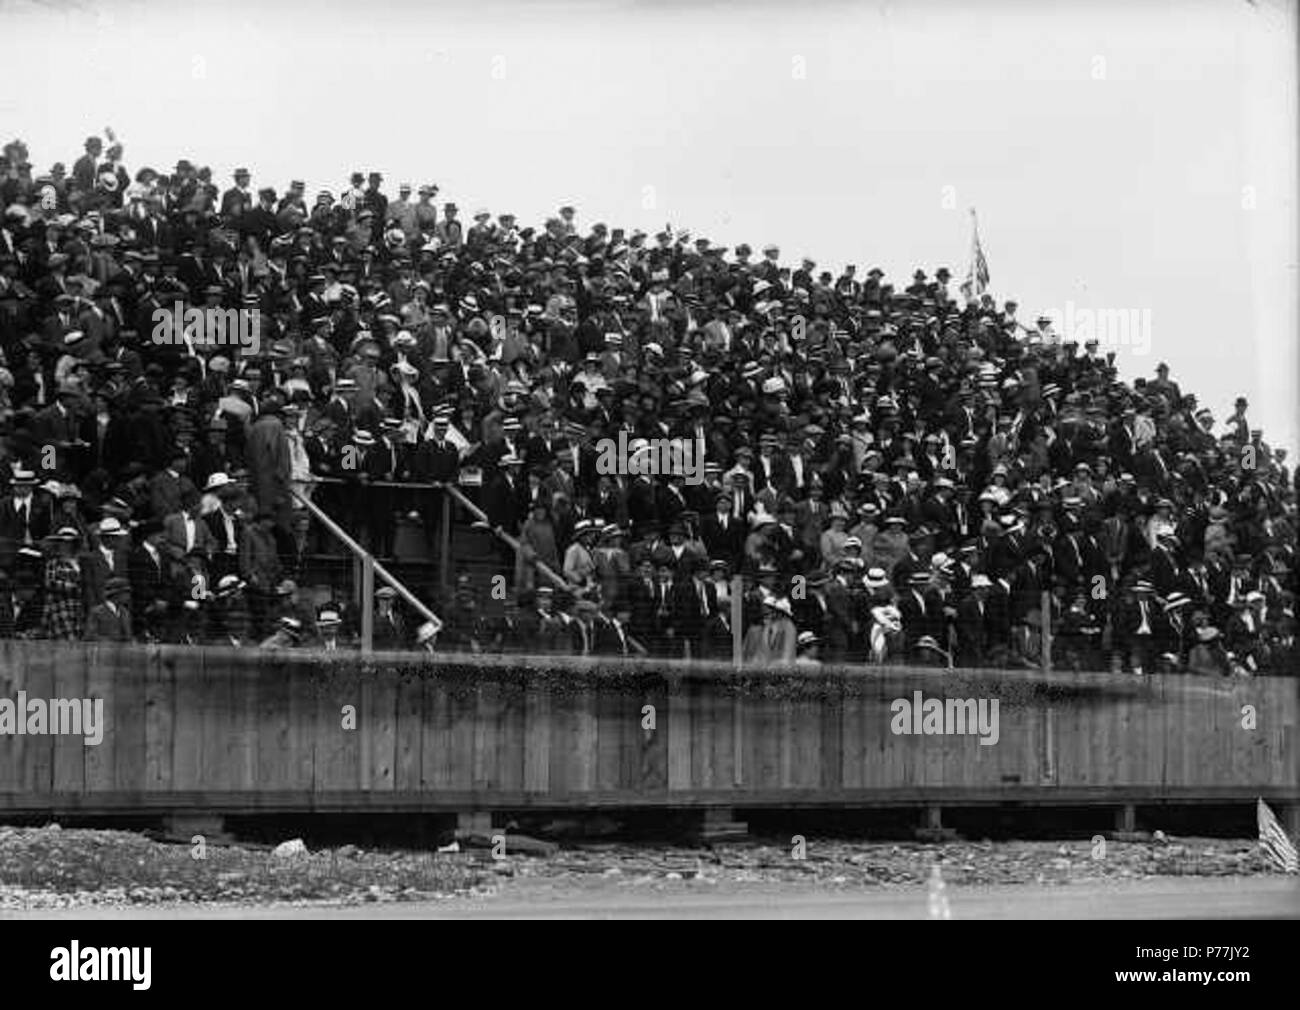 English: Crowds in stands at Tacoma Speedway July 4th - probably 1914. In 1914, over 35,000 spectators packed the grandstand and lined the field fences at the closing race of the Montamara Festo season. They had paid $1.00 for field admission and from $1.50 to $3.00 for the grandstand. The auto racing was possibly the highlight of the abbreviated July 2-4th week which featured fireworks, shows, spectacles and vaudeville. It cost the city about $100,000 to put on the annual event. There were three sanctioned races at the Tacoma Speedway with a total prize of $10,500 which drew entries from the  Stock Photo